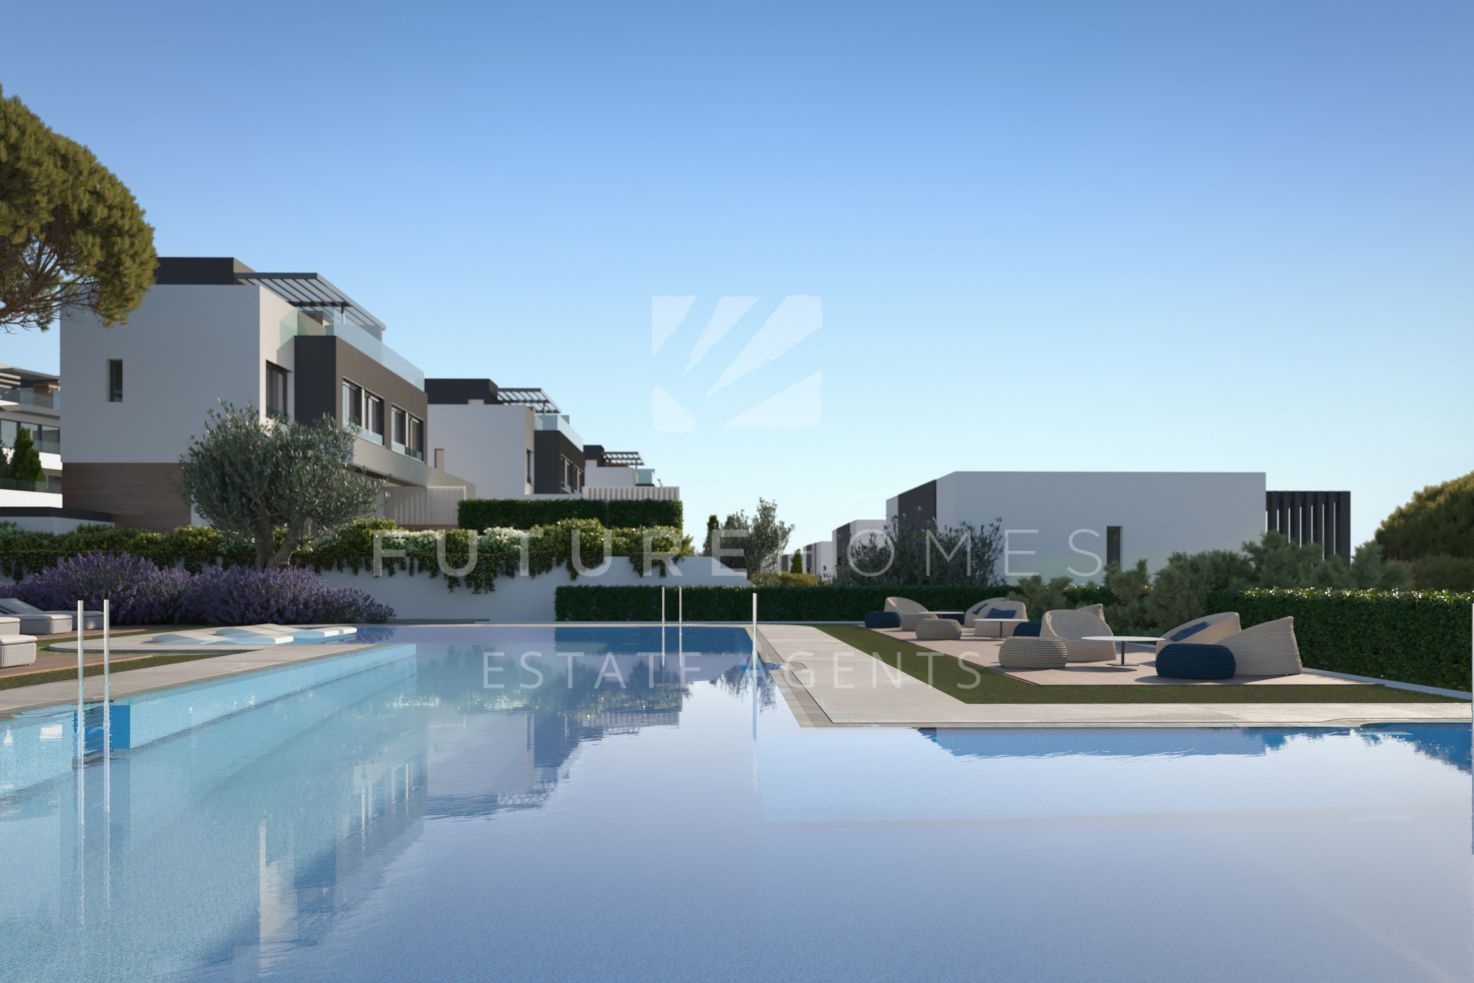 50 Front Line Golf semi-detached villas. Located next to the Atalaya Golf Country Club